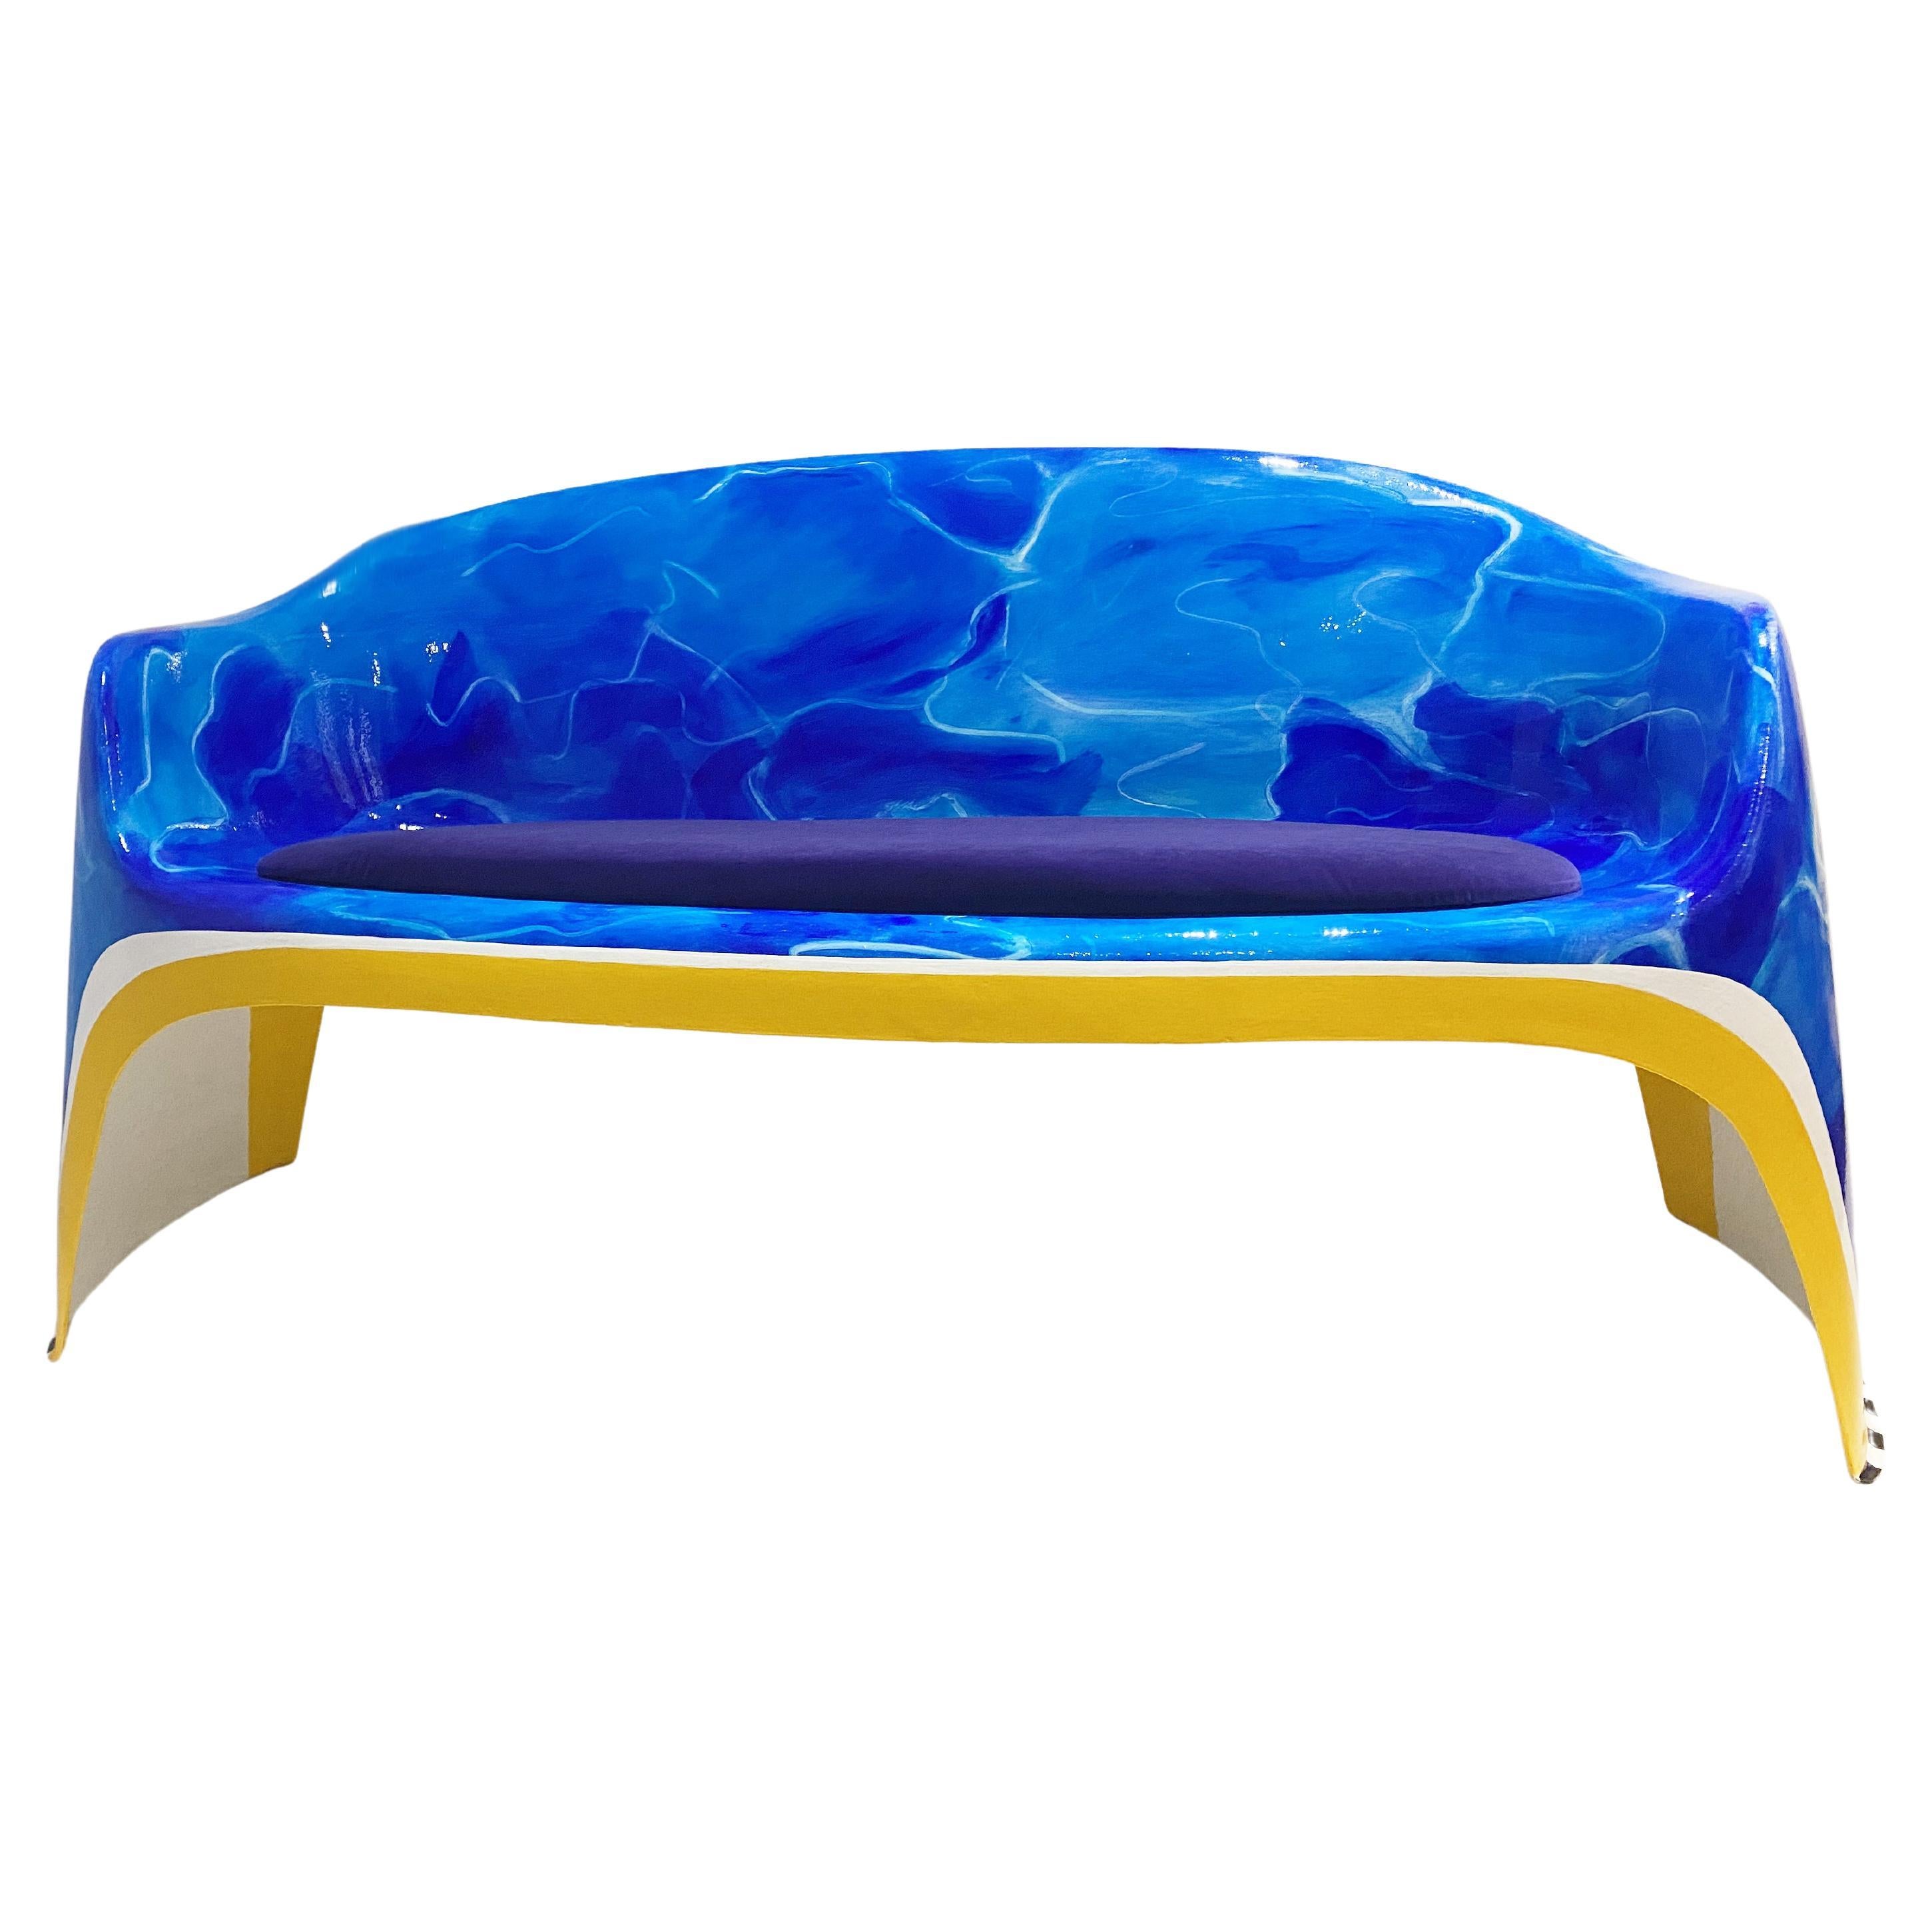 ELEMENT 00002 Swimming Bench 2 For Sale